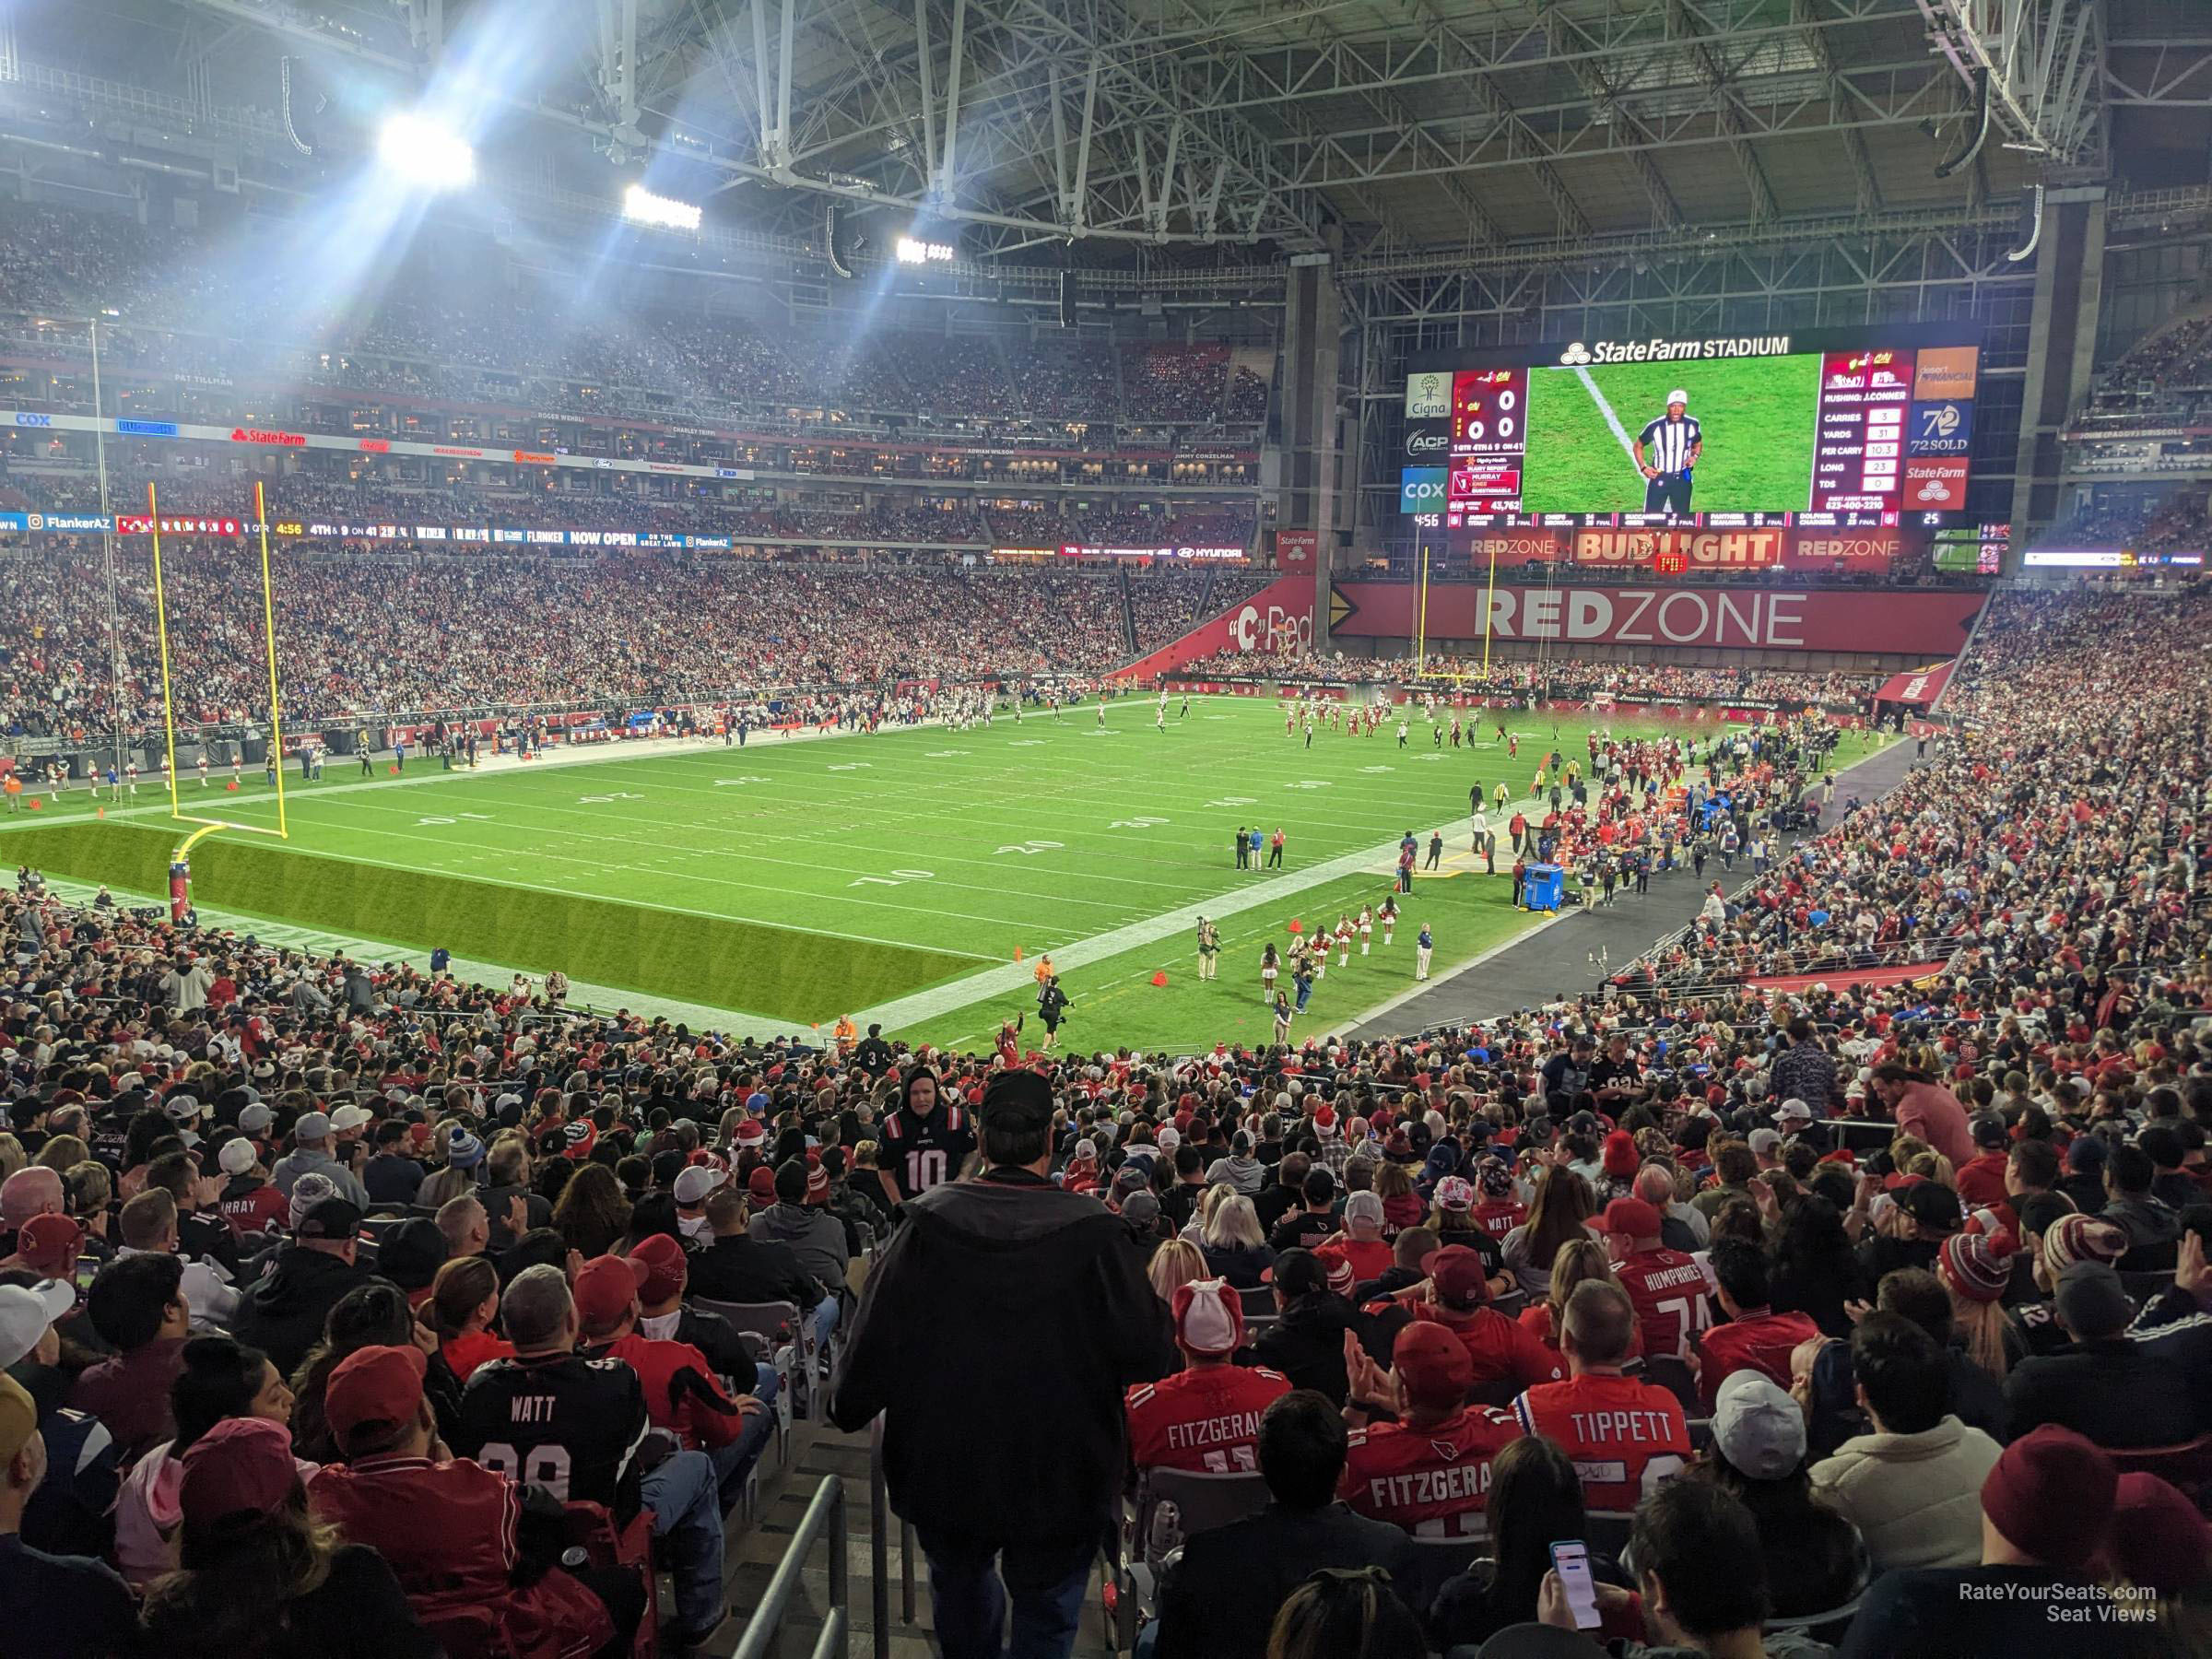 section 115, row 41 seat view  for football - state farm stadium